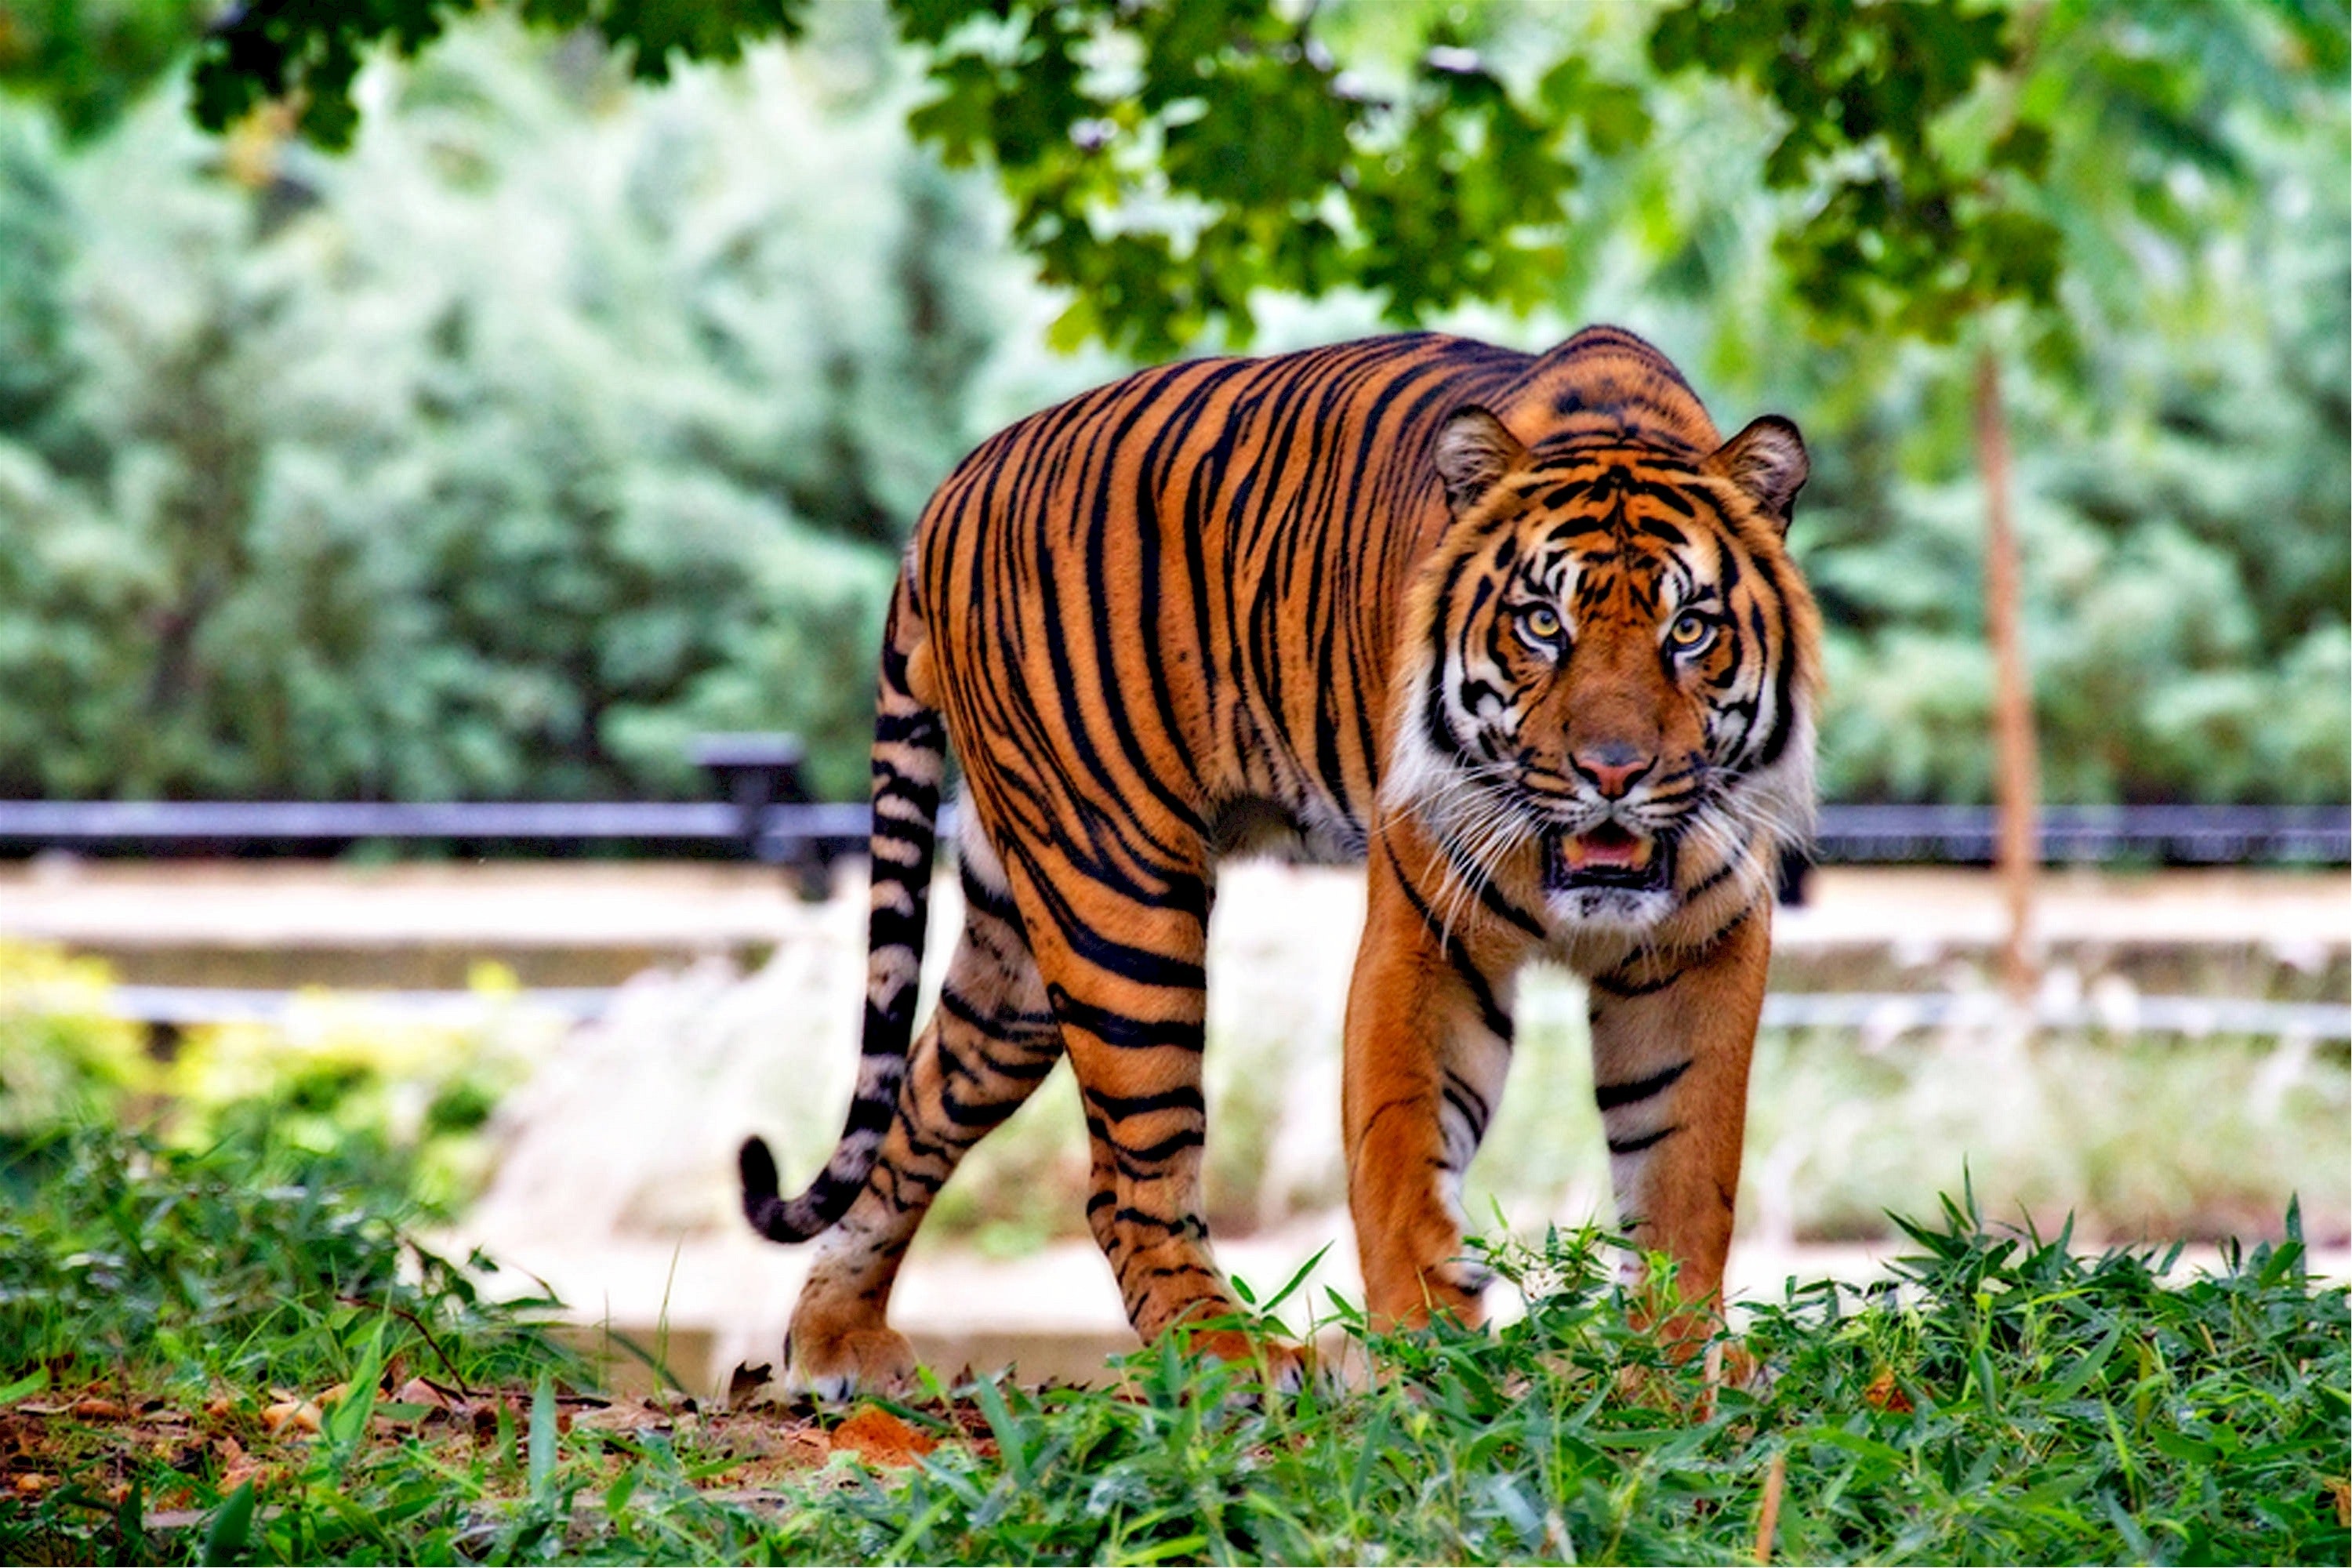 Tigers photos download the best free tigers stock photos hd images